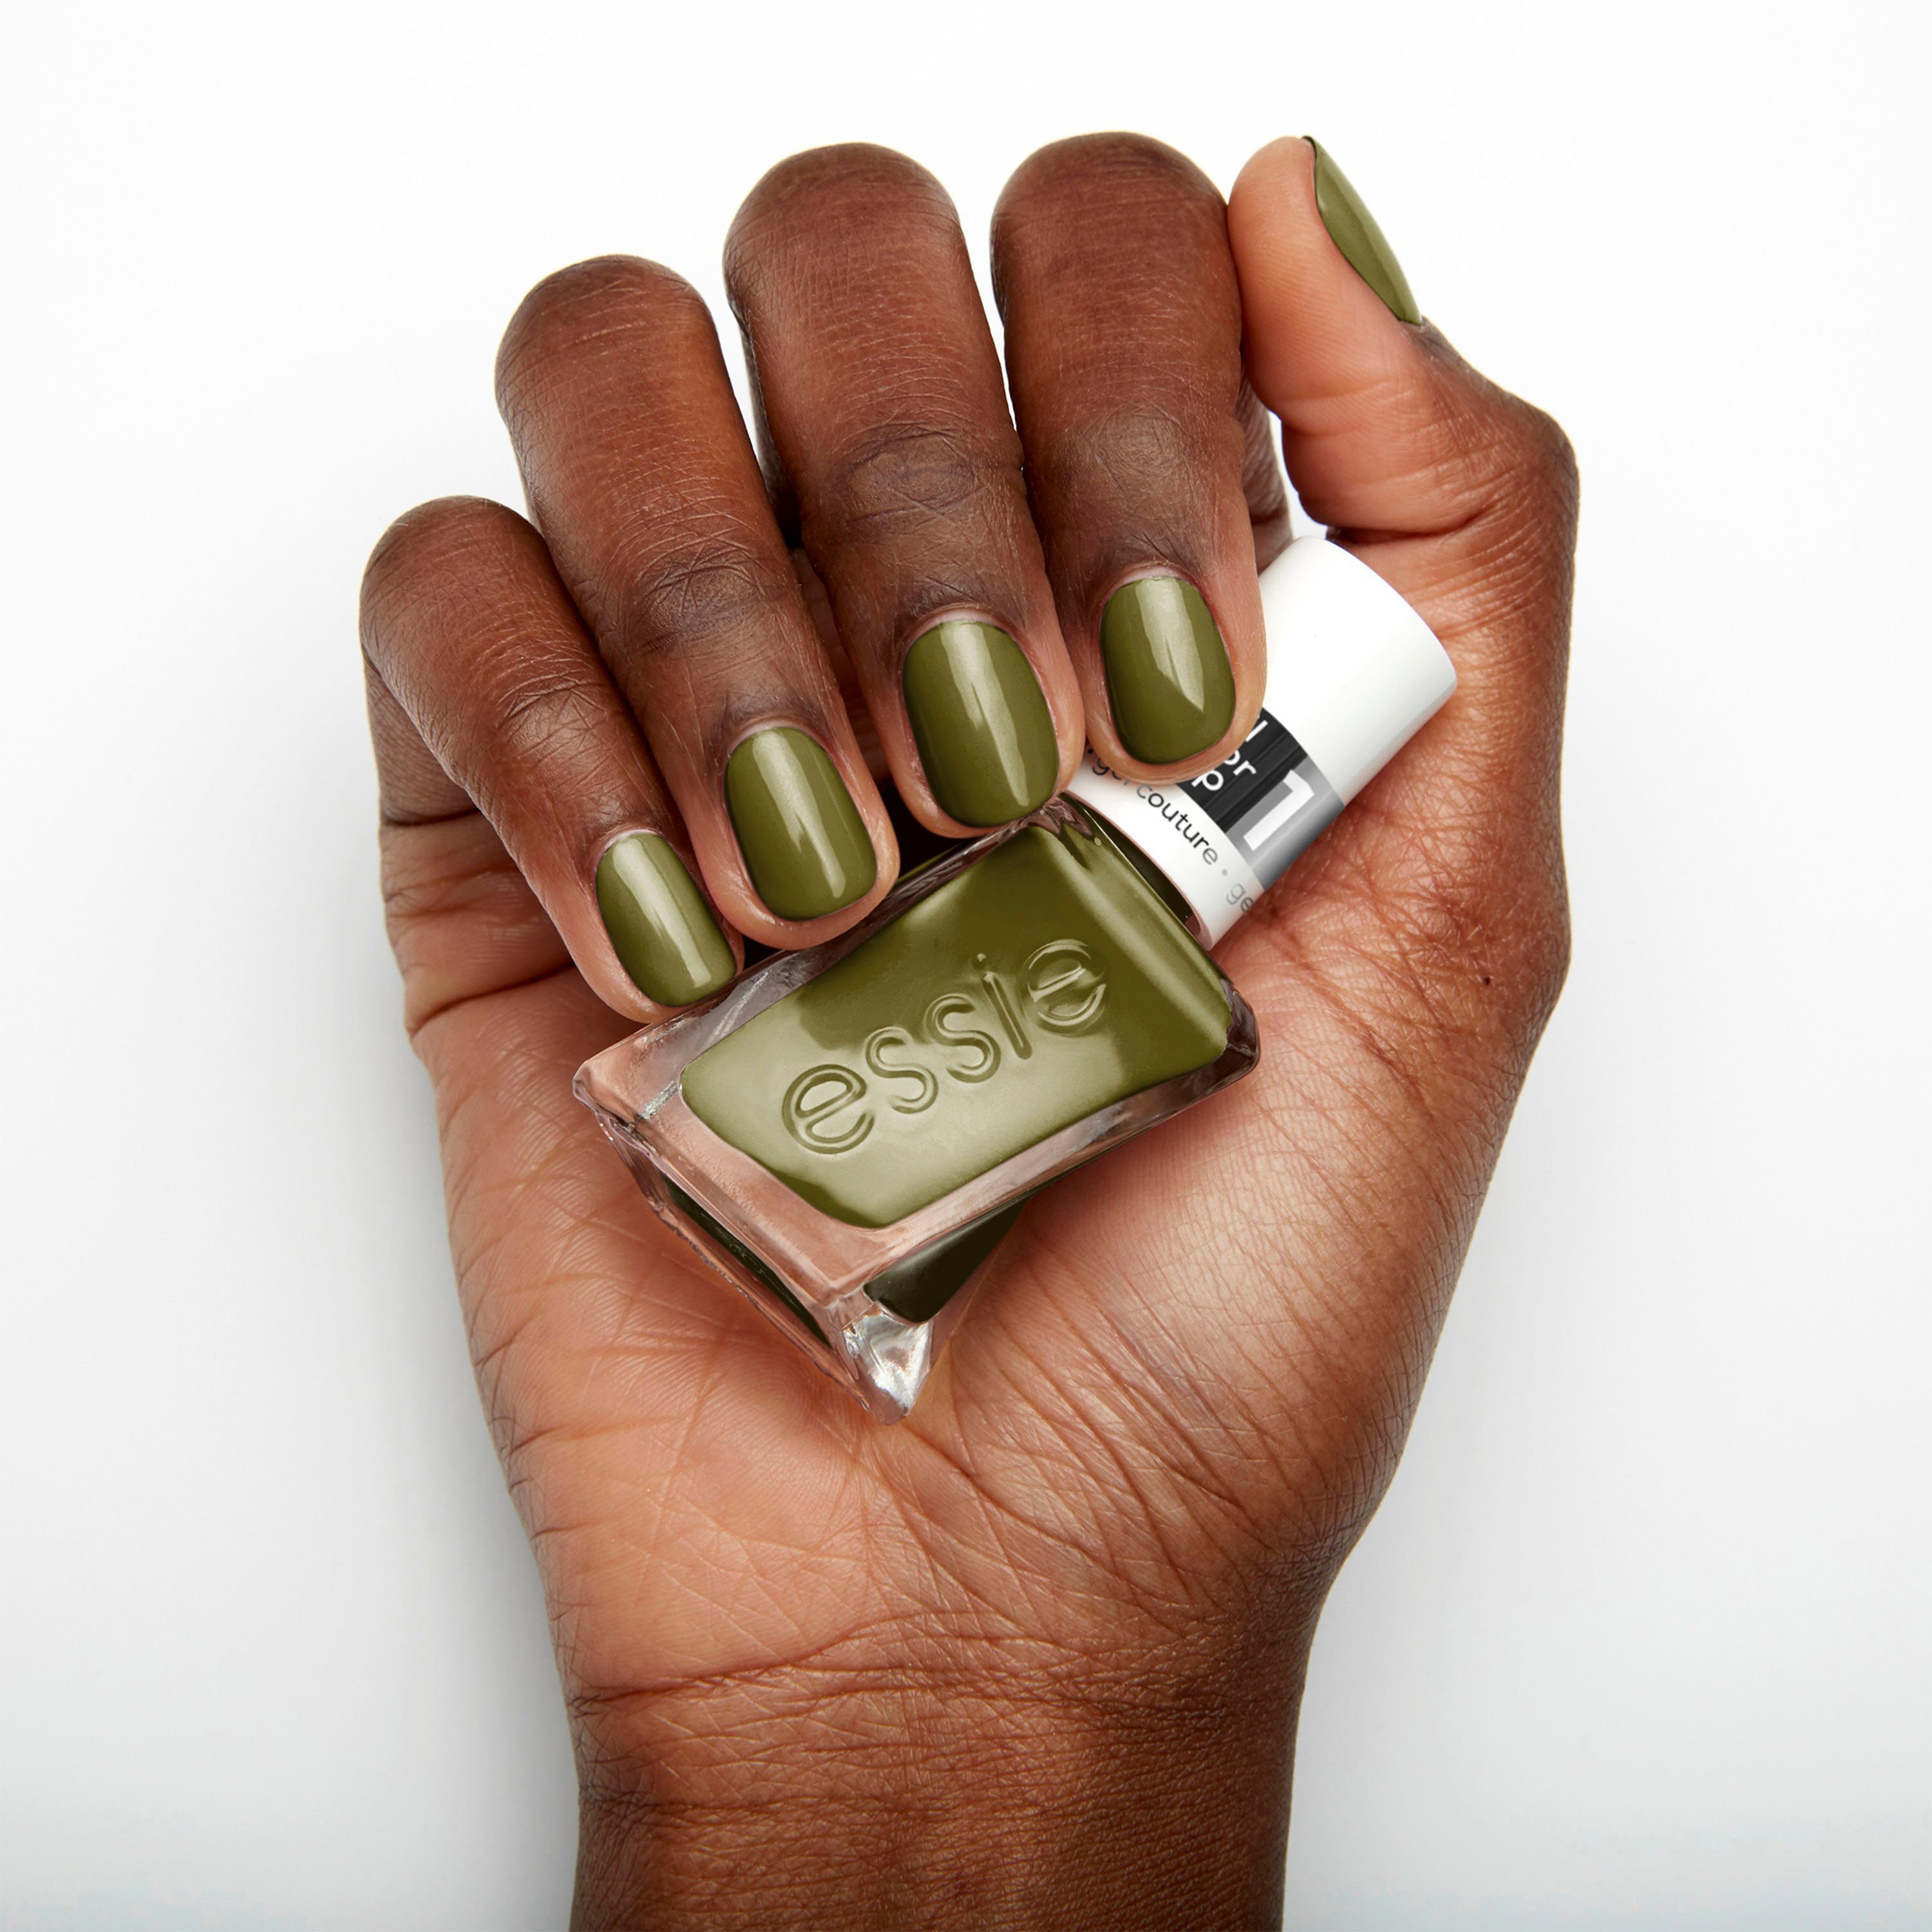 - couture plaid, Nagellack, gel 540 gel totally couture essie